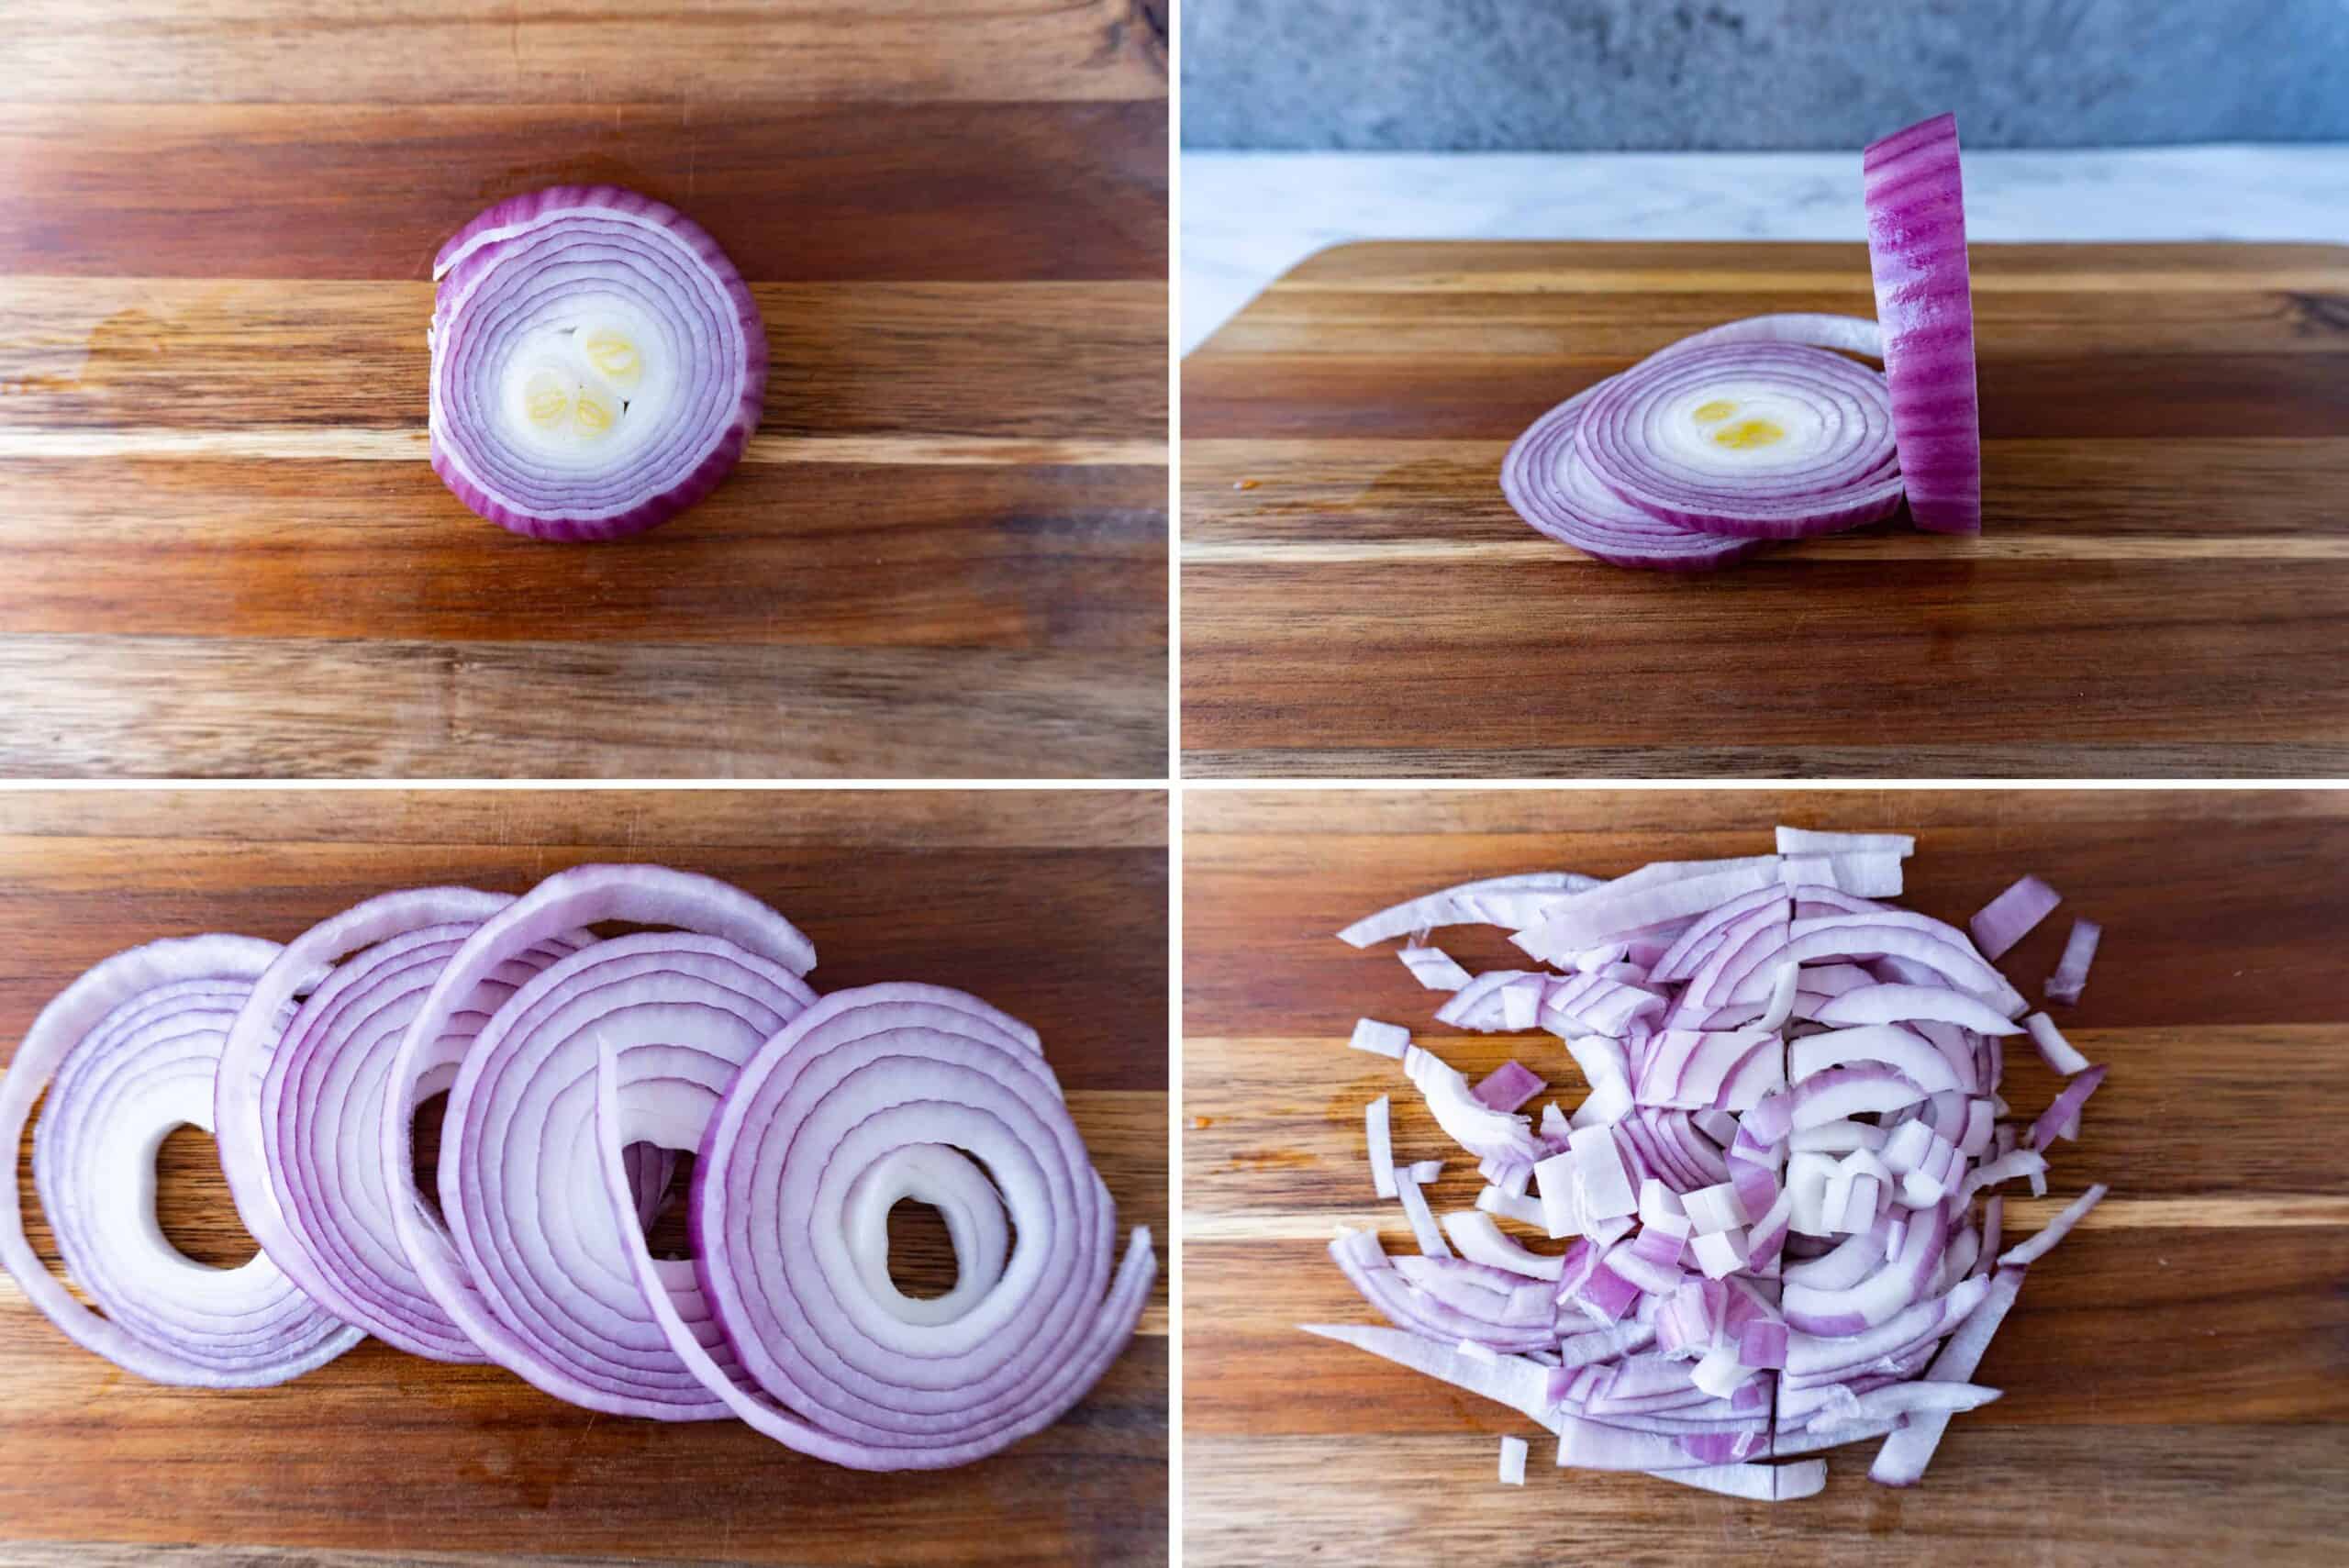 HOw to cut an onion